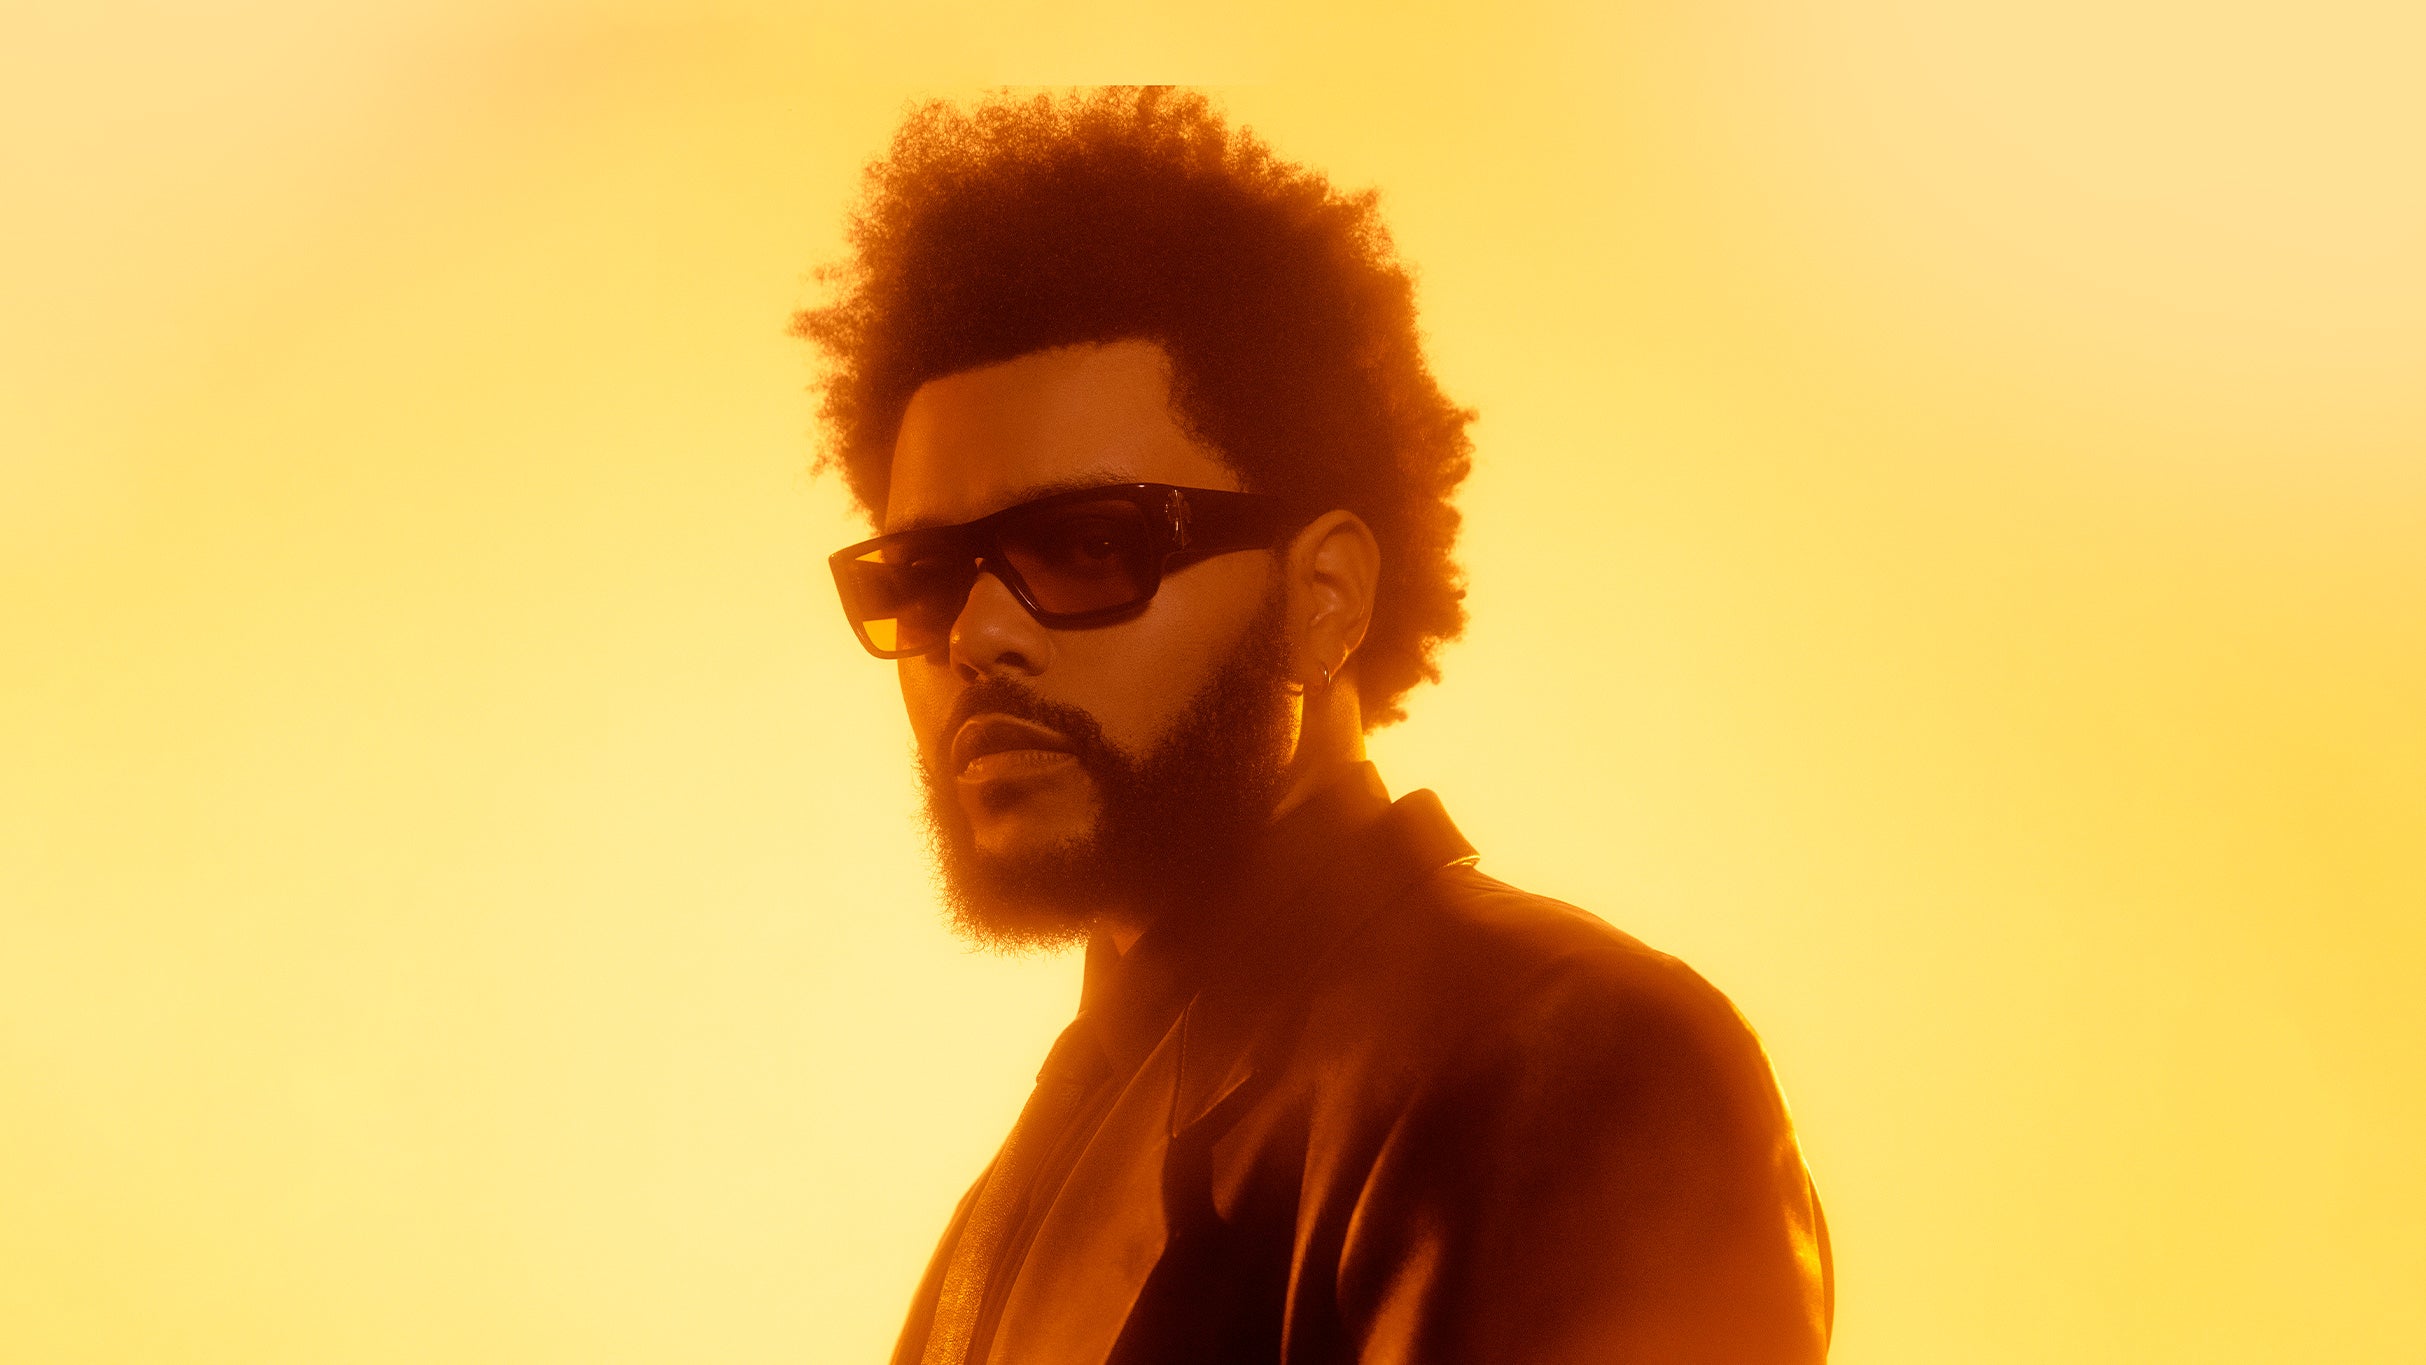 The Weeknd: After Hours til Dawn pre-sale code for concert tickets in Auckland, NZ (Eden Park)